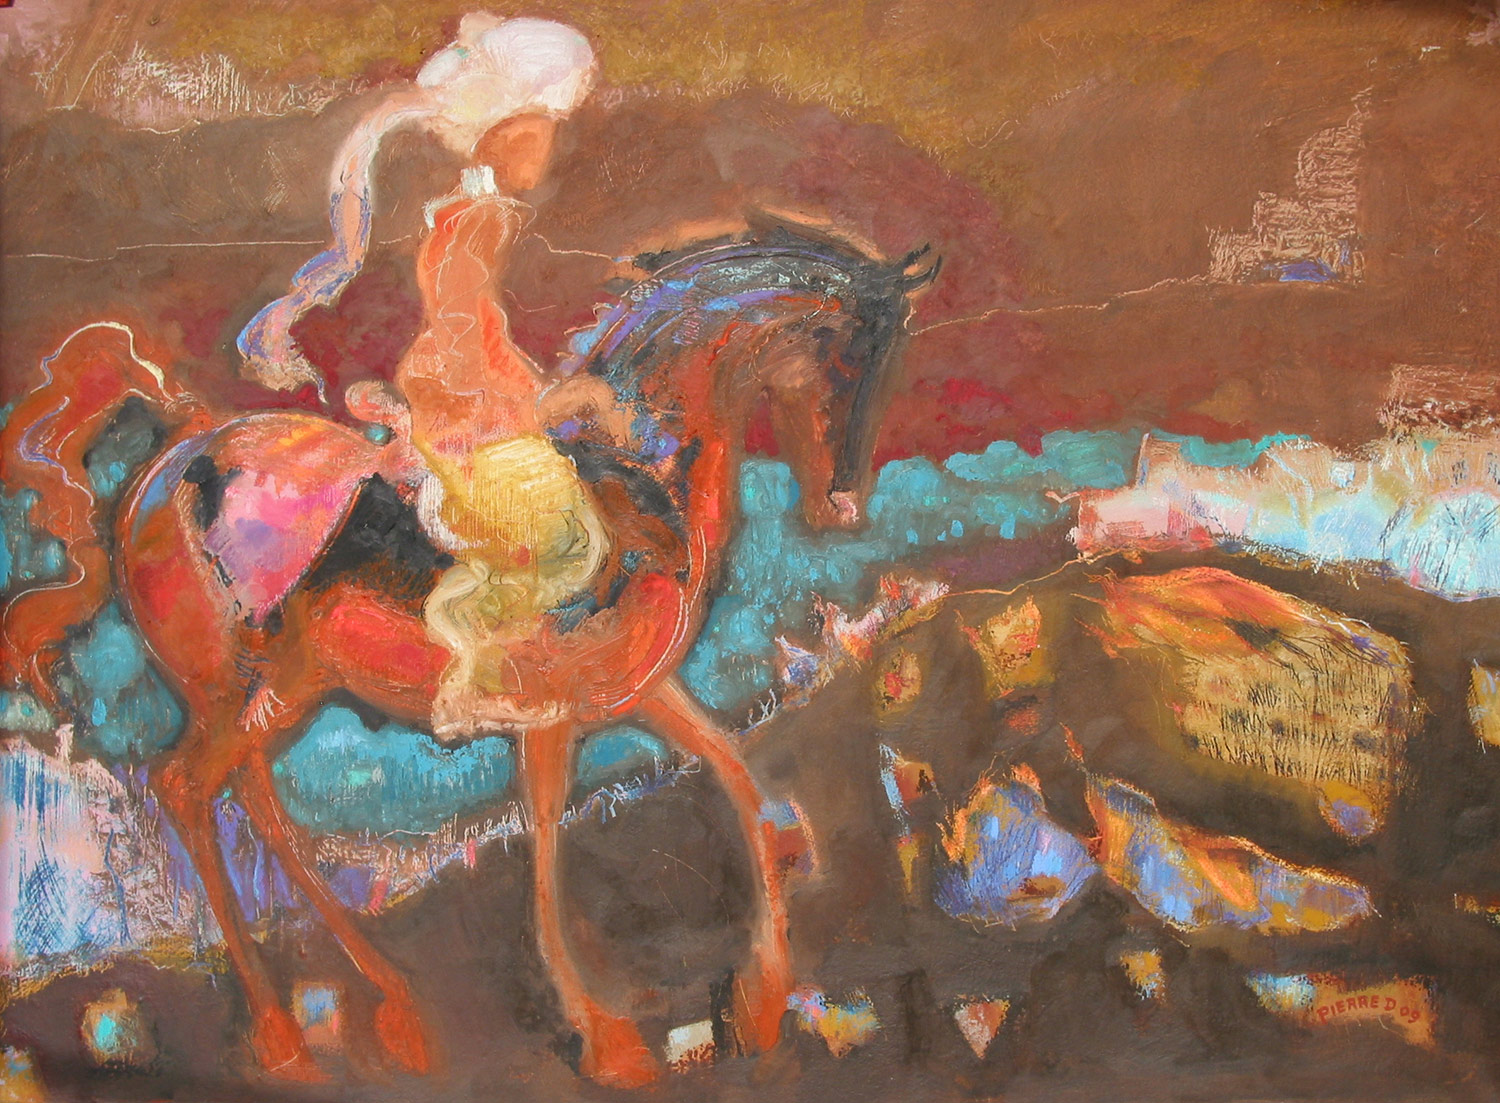  Night on Fire Mountain &nbsp; ©  Oil and oil pastel on fine paper  74 cm high x 105 cm wide 